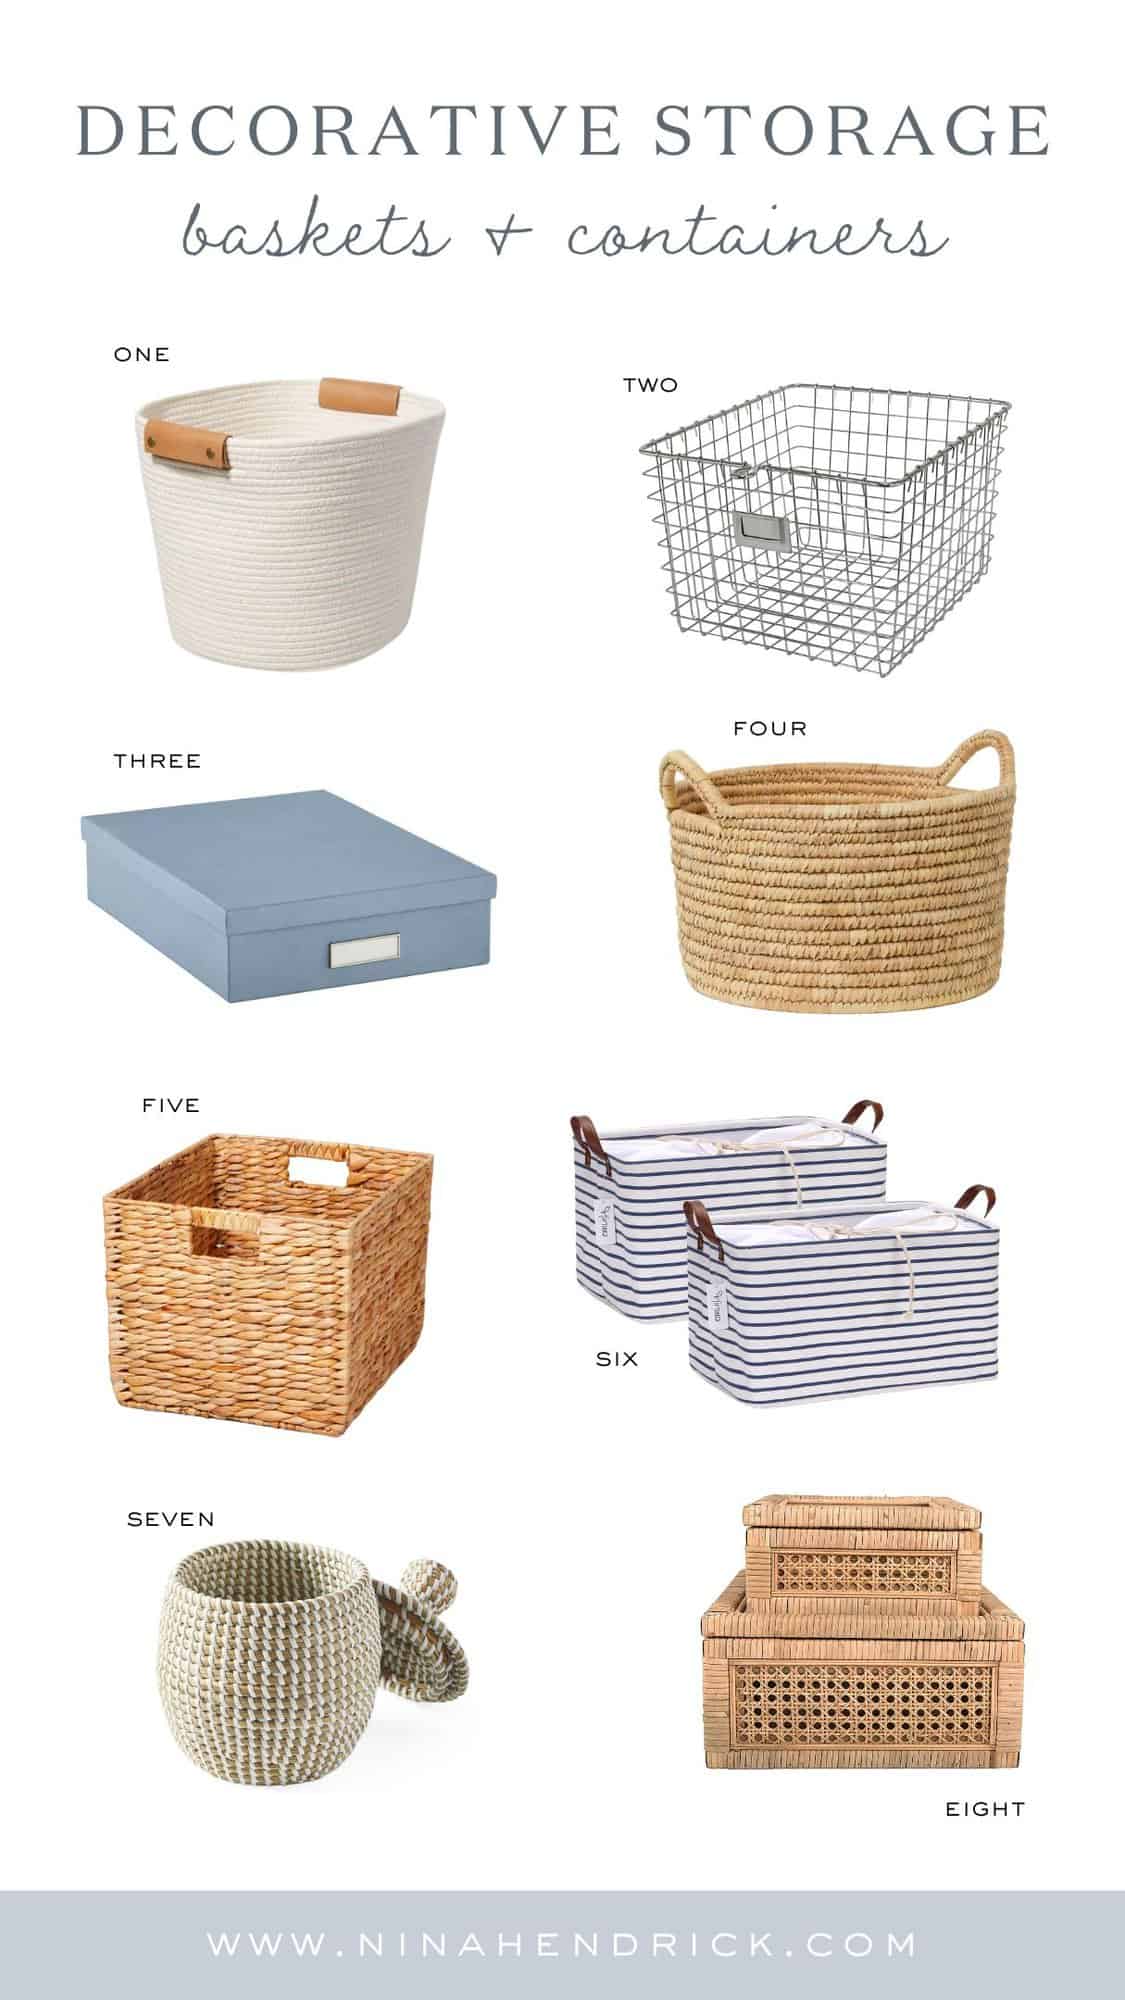 Home organization containers and storage baskets shoppable collage